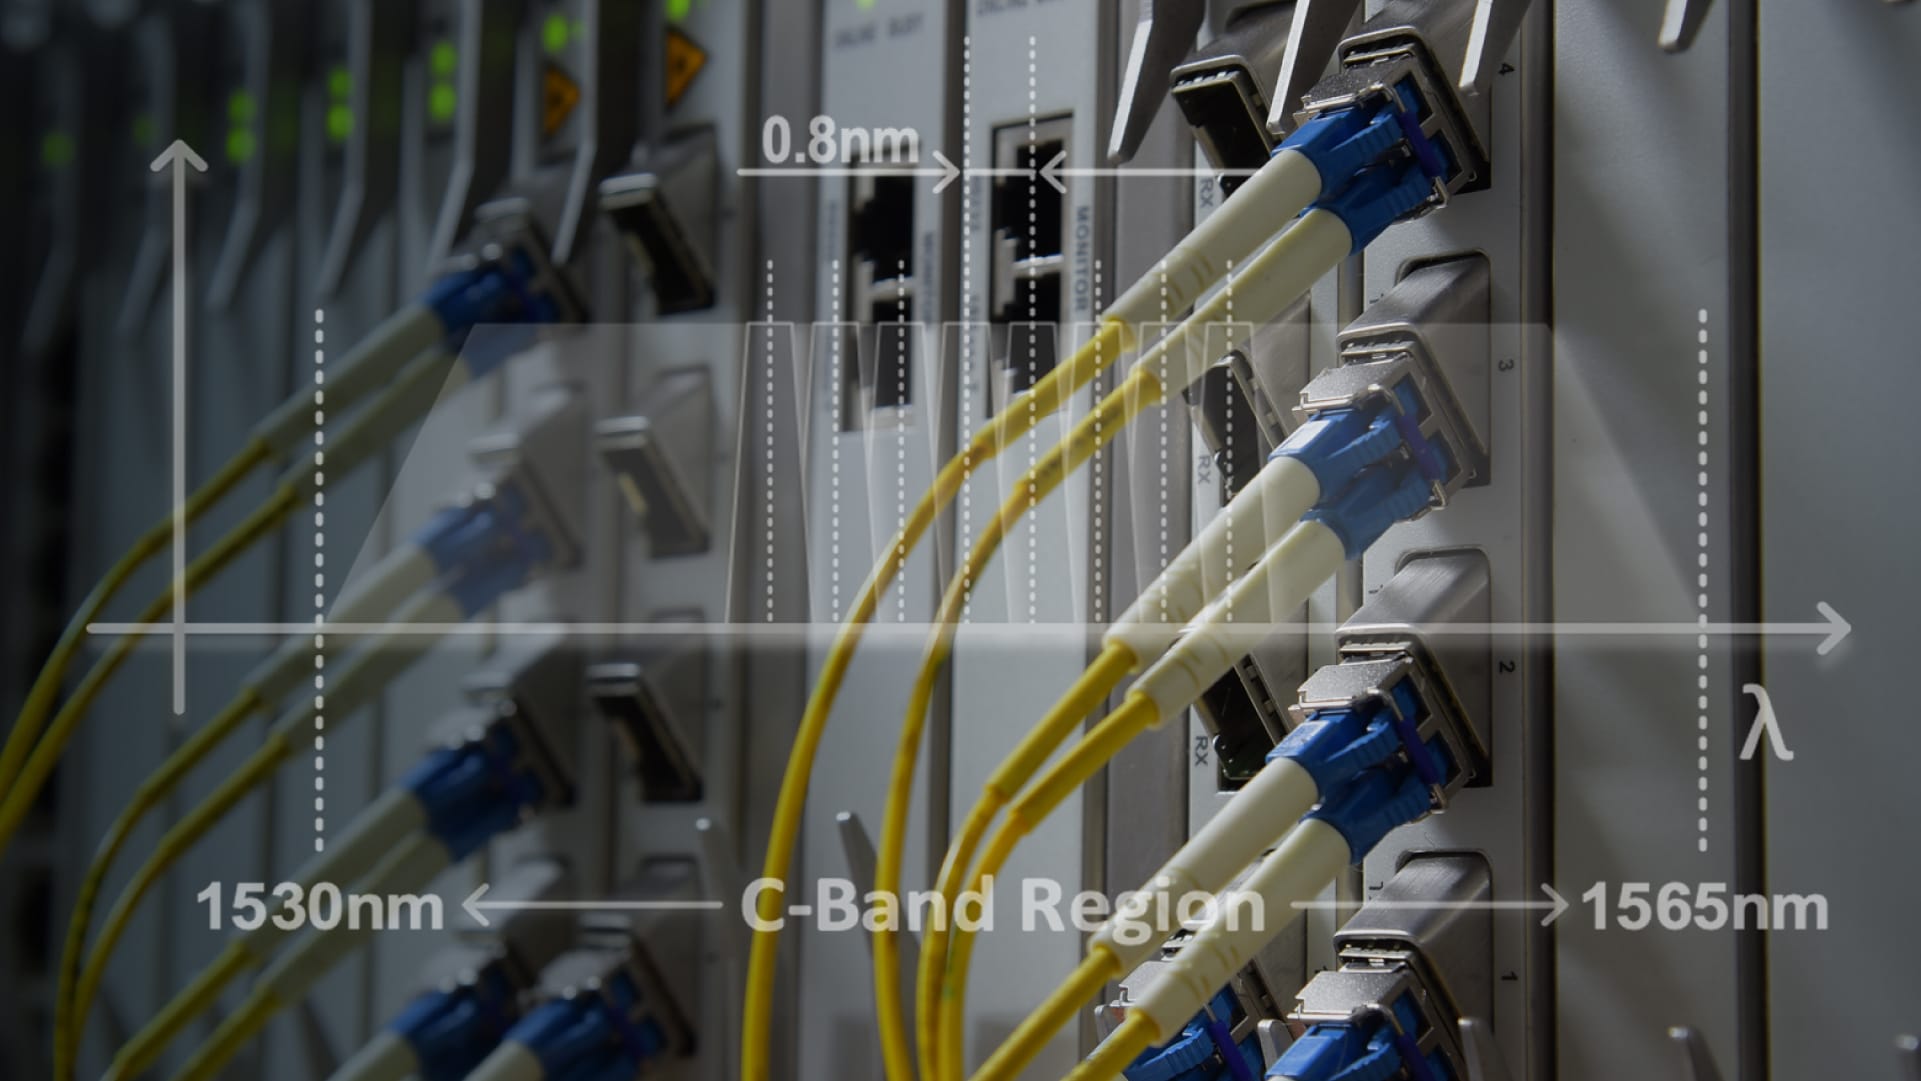 Cables in the C-Band Region plugged into optical data center equipment